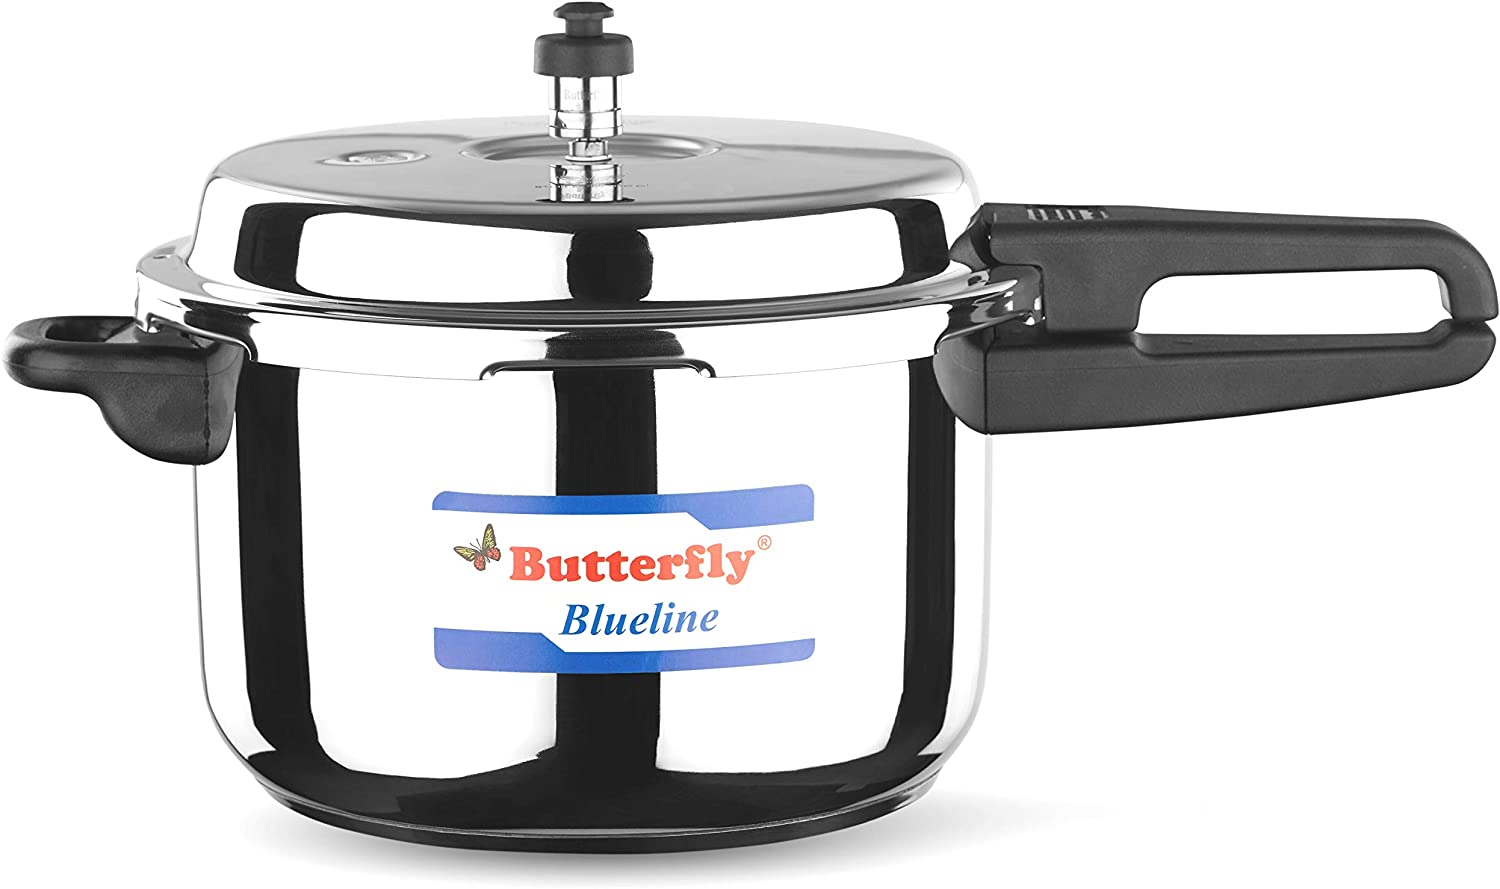 Butterfly Blue Line Stainless Steel Pressure Cooker 7.5 Liter | Kitchen Appliance | Halabh.com